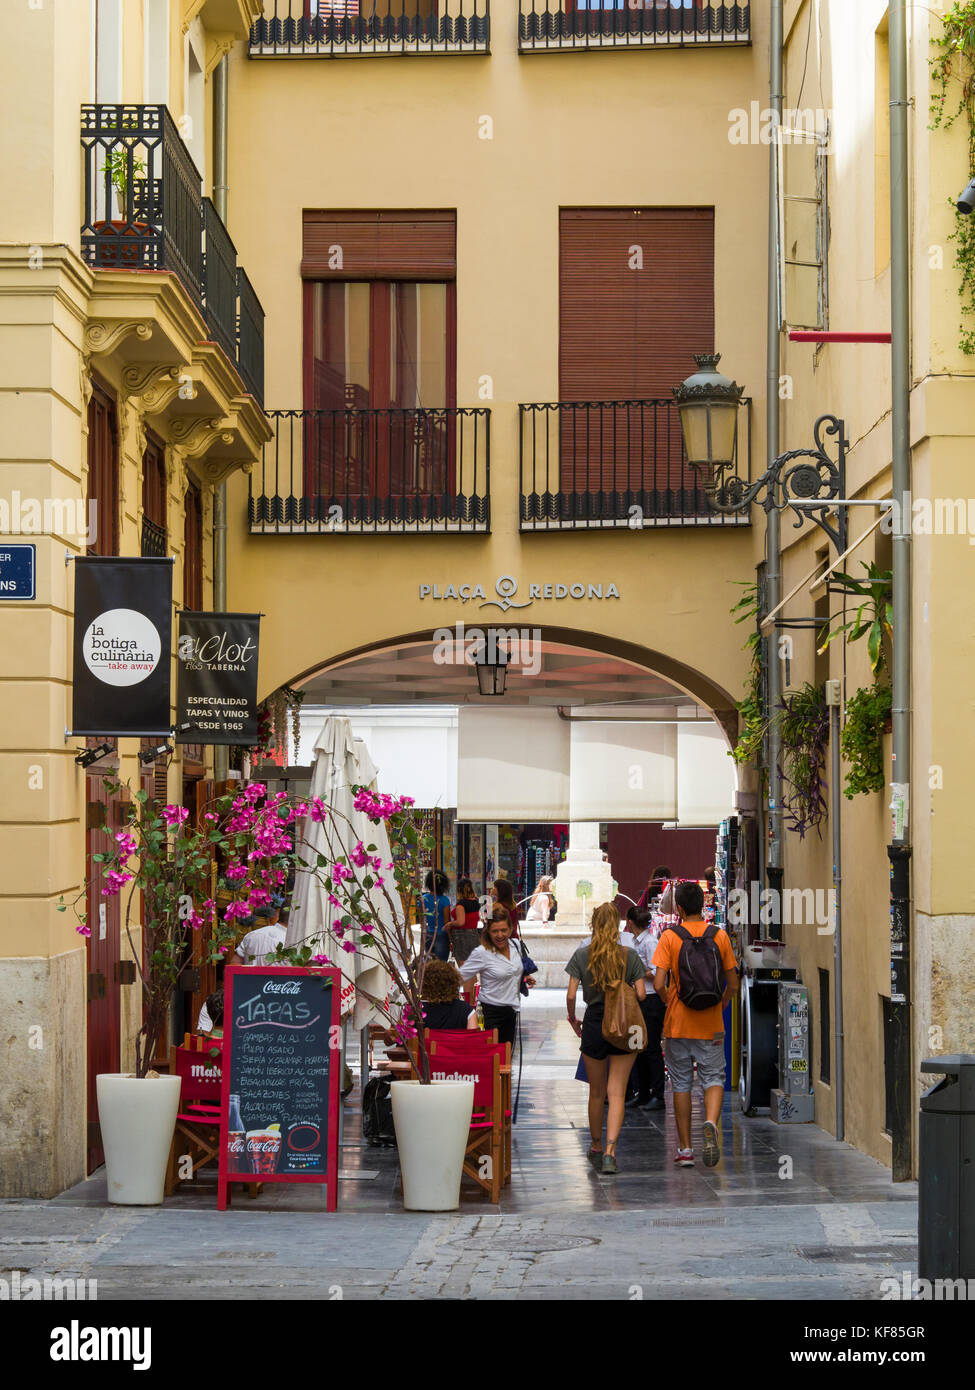 One of the entrances to Plaça Redona, a circular  pedestrianised area  containing boutique stalls, shops and tapas bars, Valencia, Spain Stock Photo